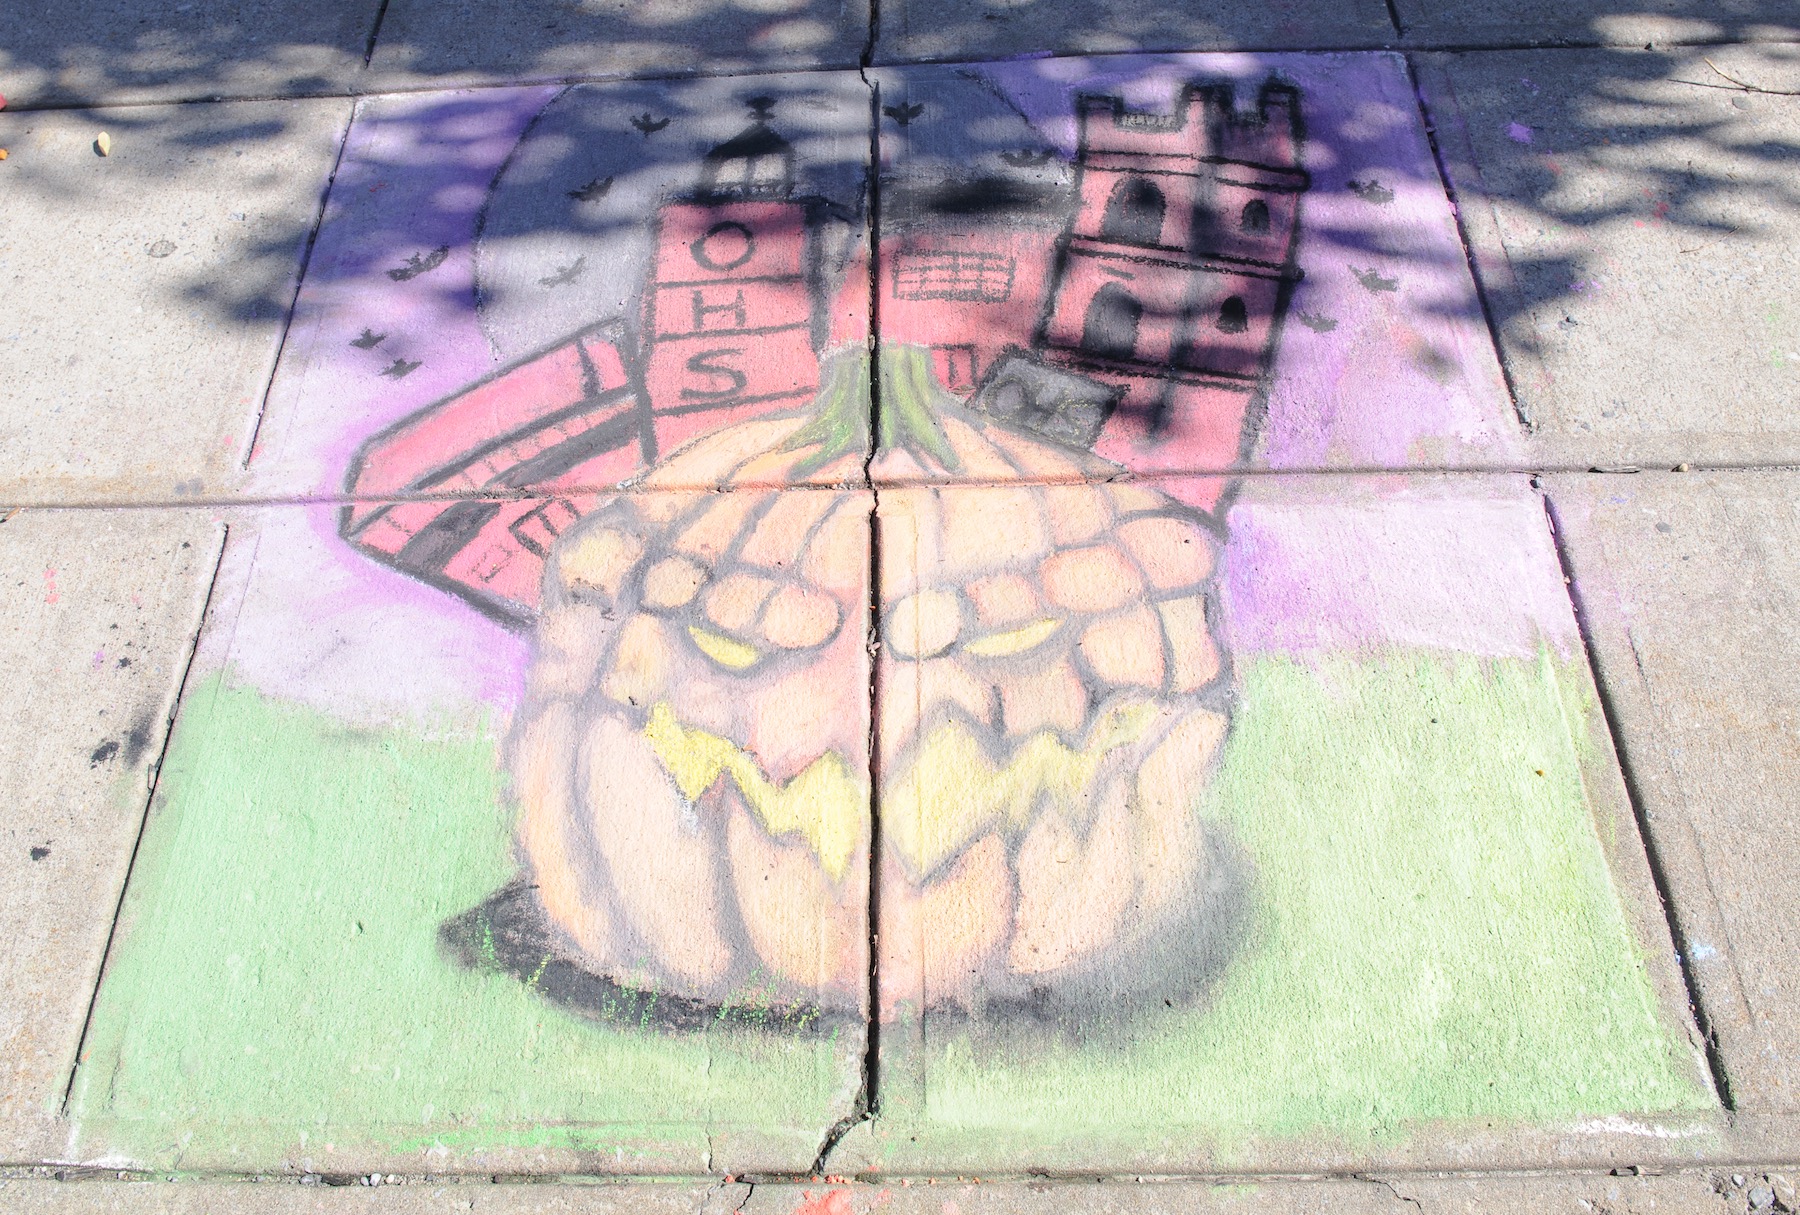 Ossining High School student artists Kabi Boukari, Jaiyee Webb and Ana Casteneda tied for third place at the Village of Ossining’s second annual Chalk It Up! festival held recently at Market Square.